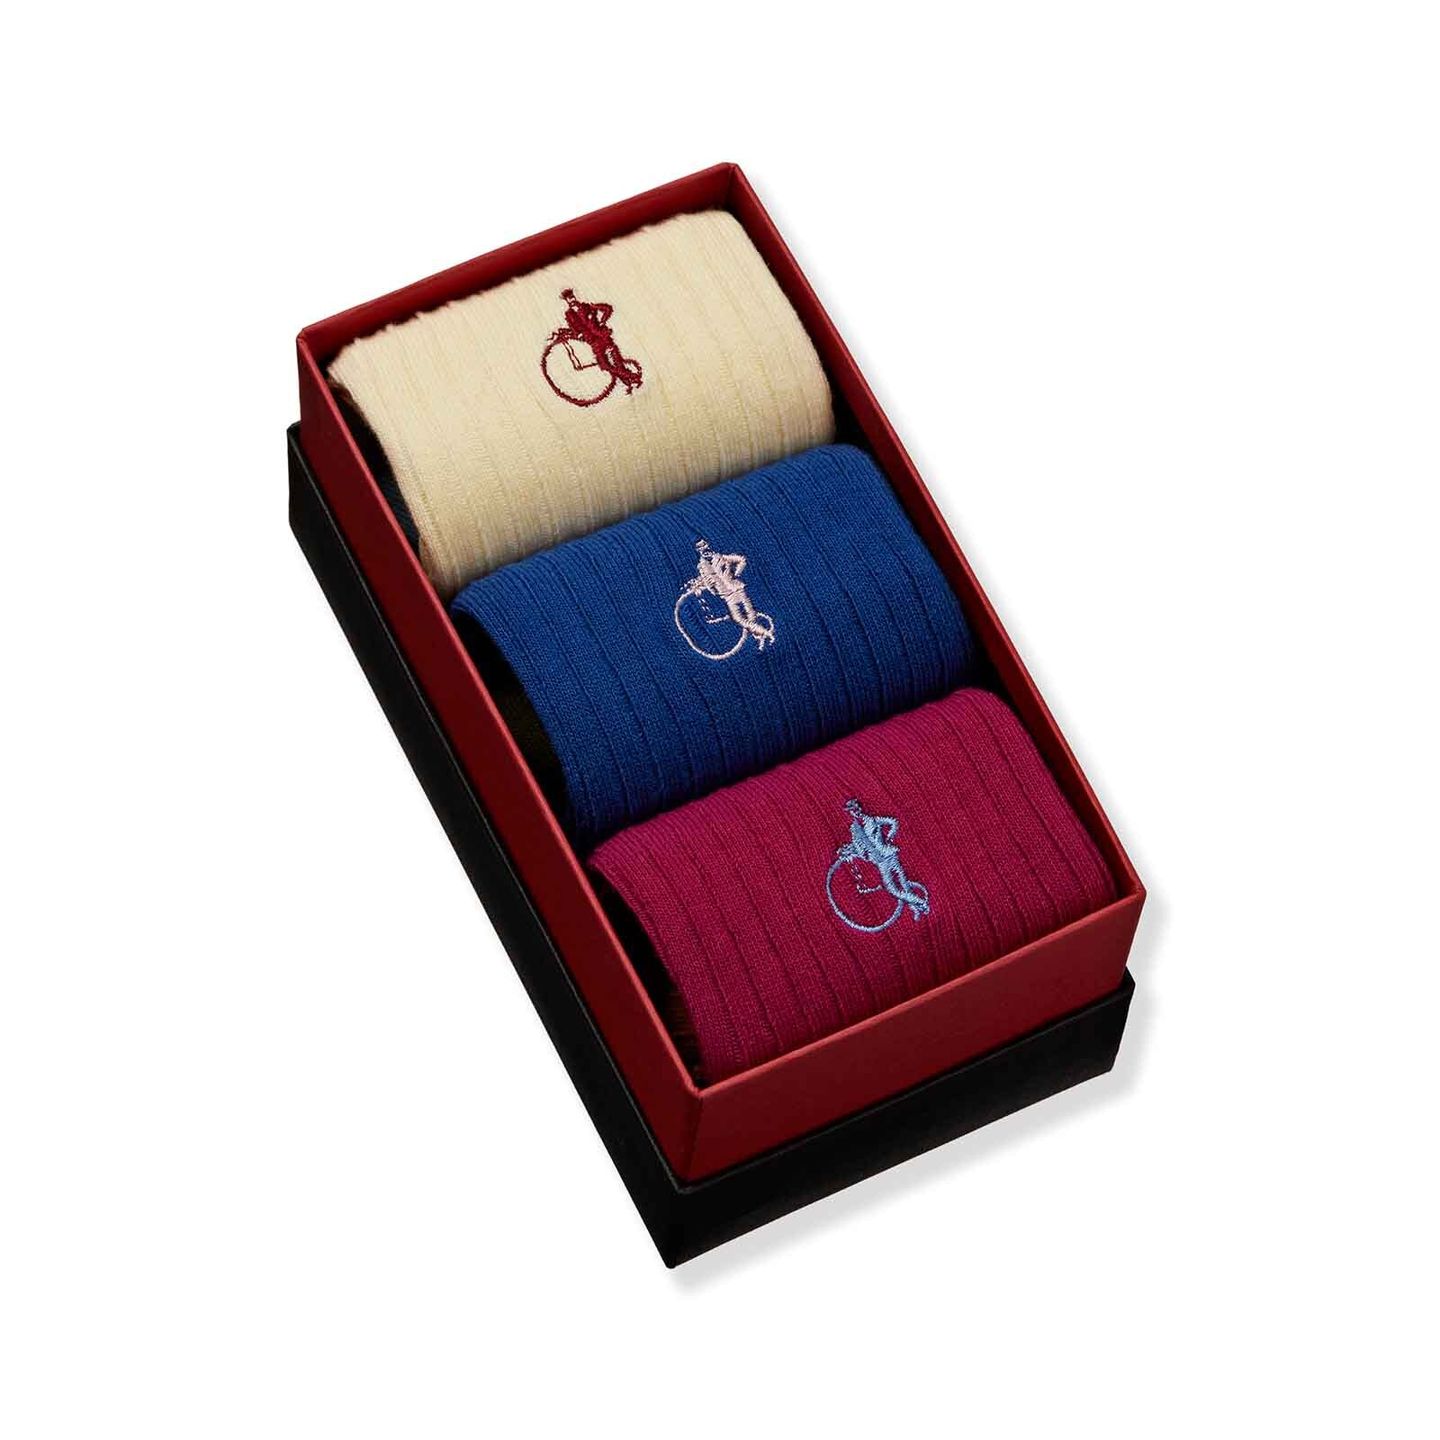 Trio hidden pop collection socks in cream, royal blue and mulberry red